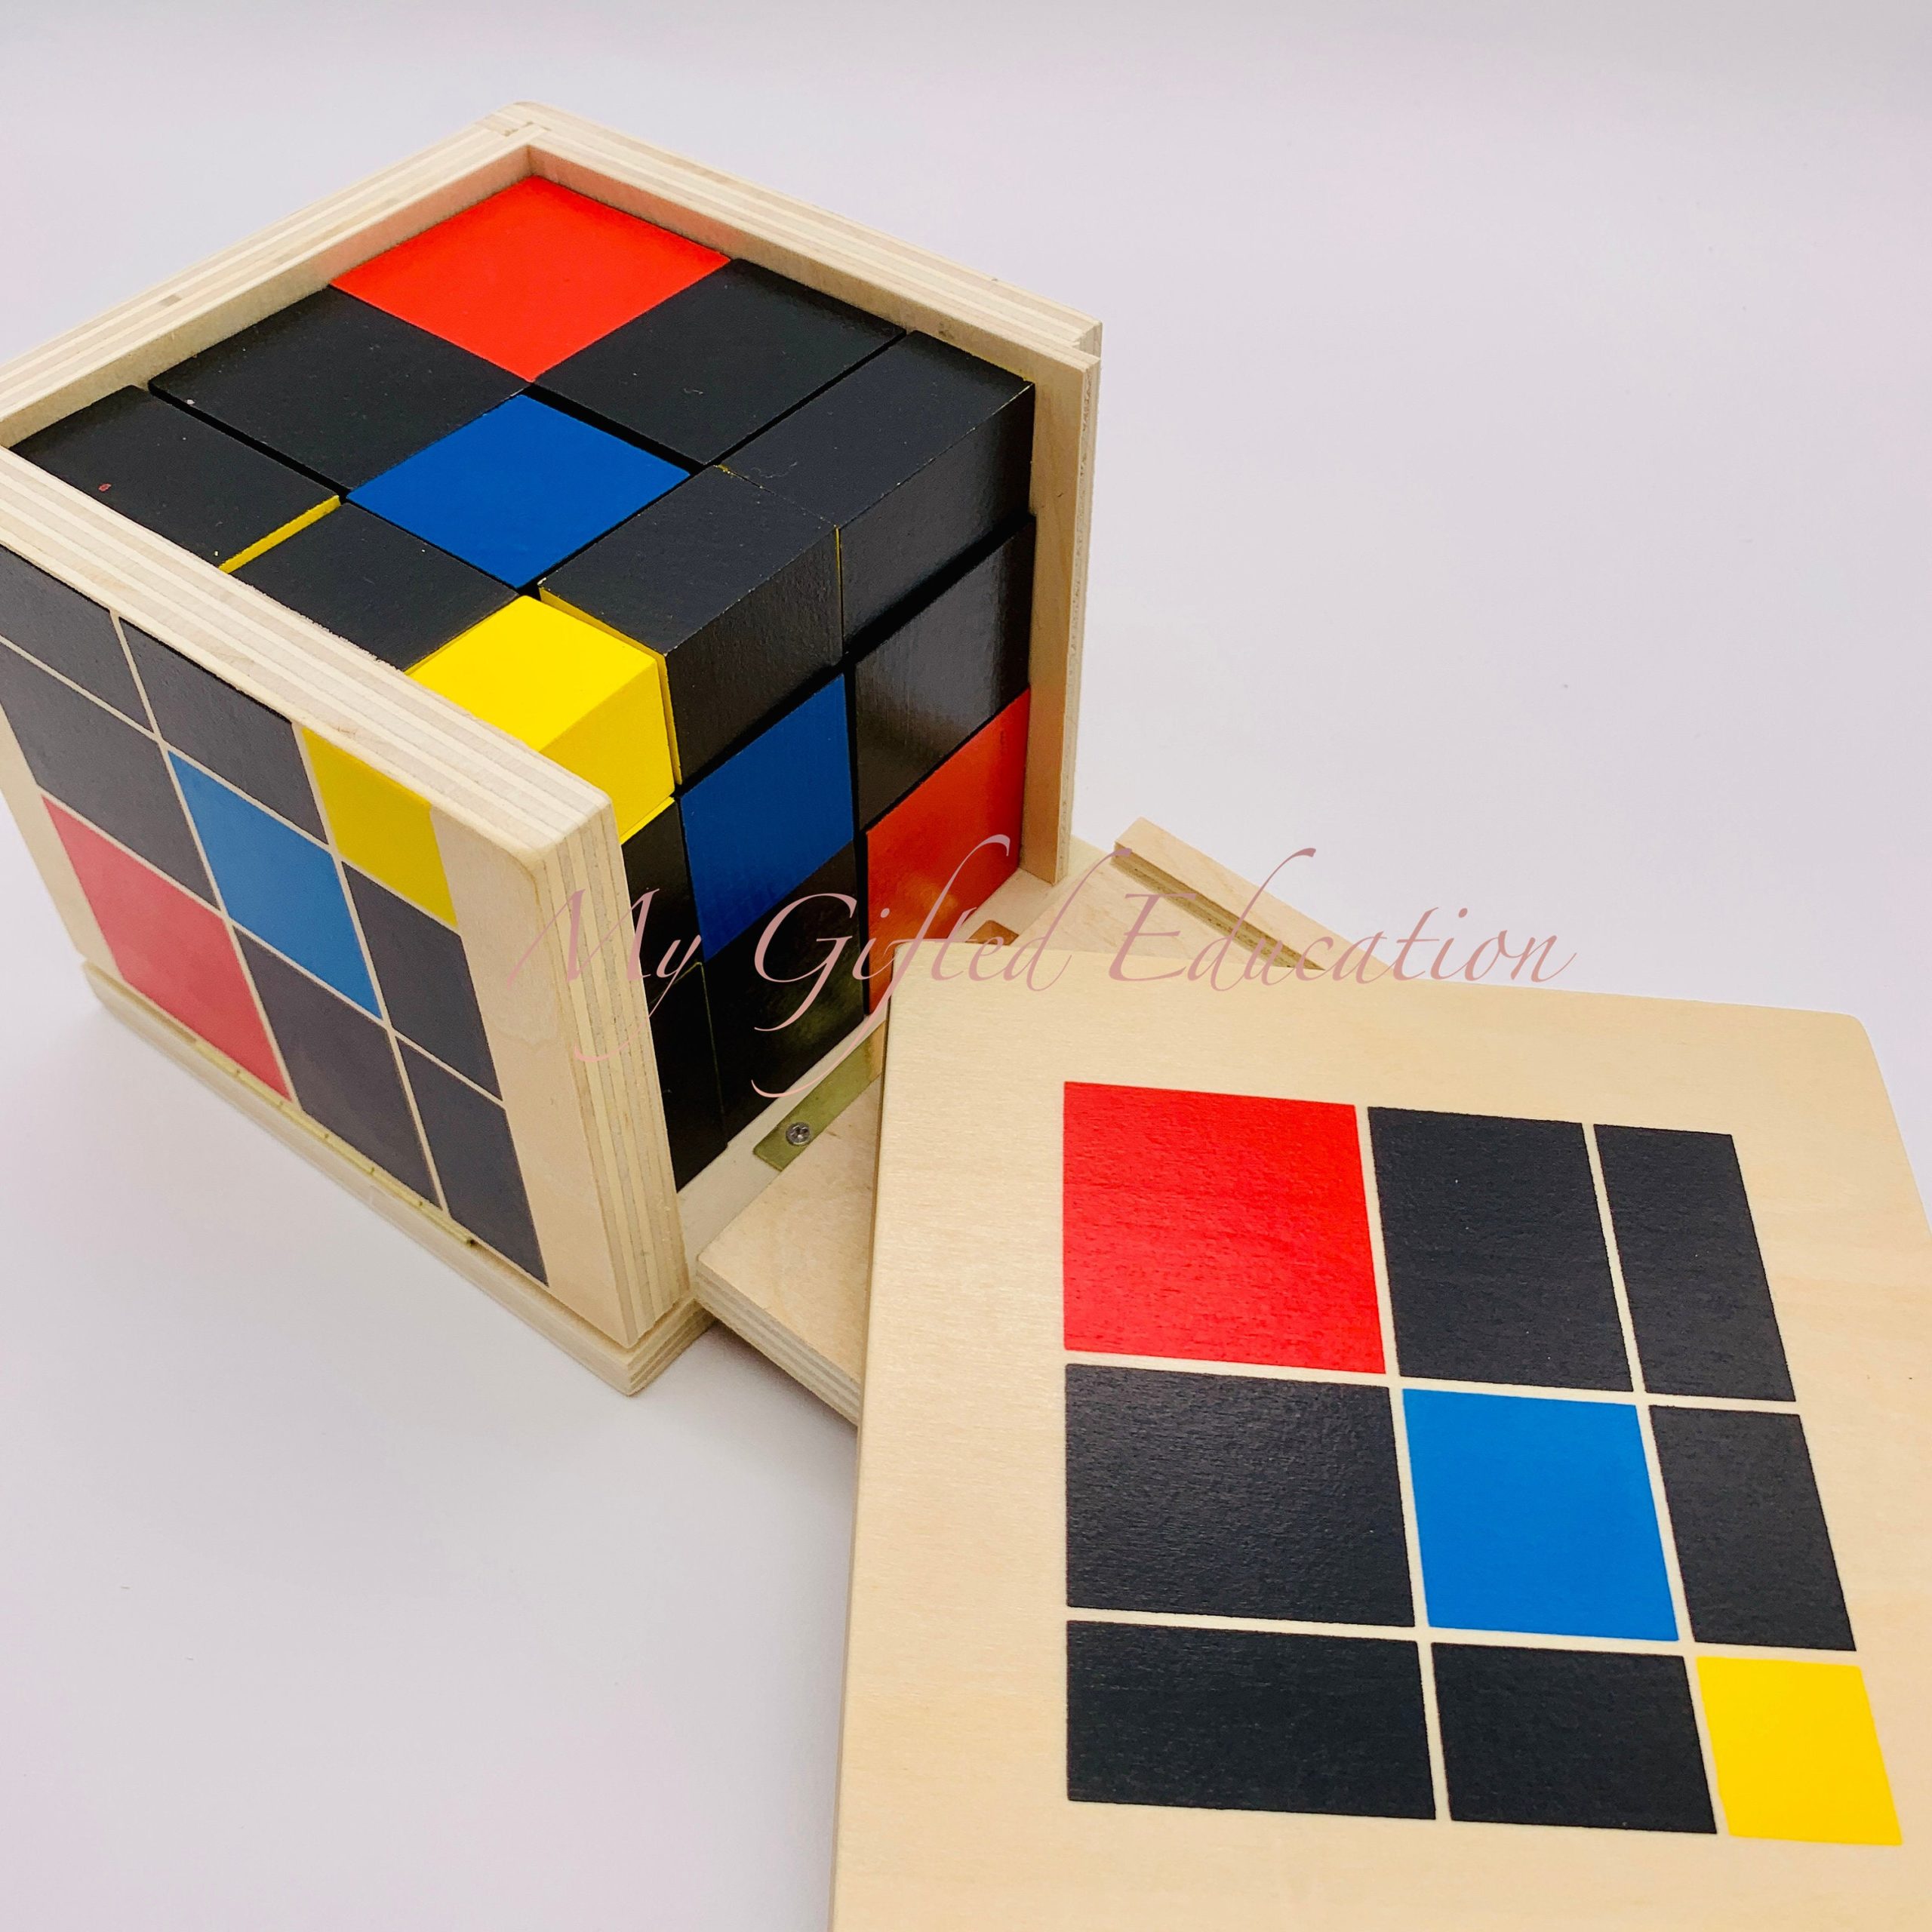 Montessori Trinomial Cube. The three-dimensional puzzle made up of 27  wooden blocks which is…